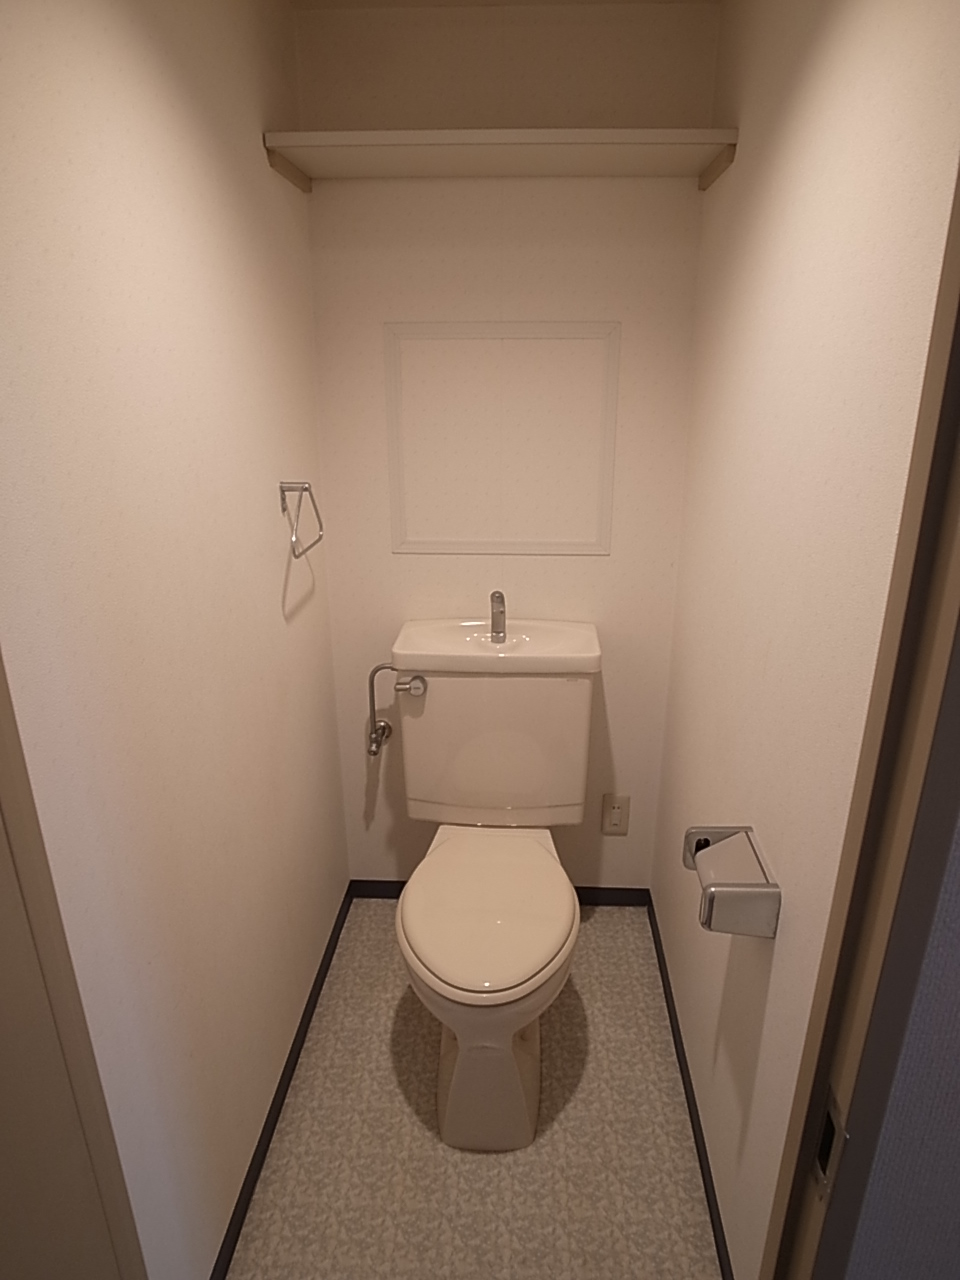 Toilet. Western-style toilet. Washlet is possible installation